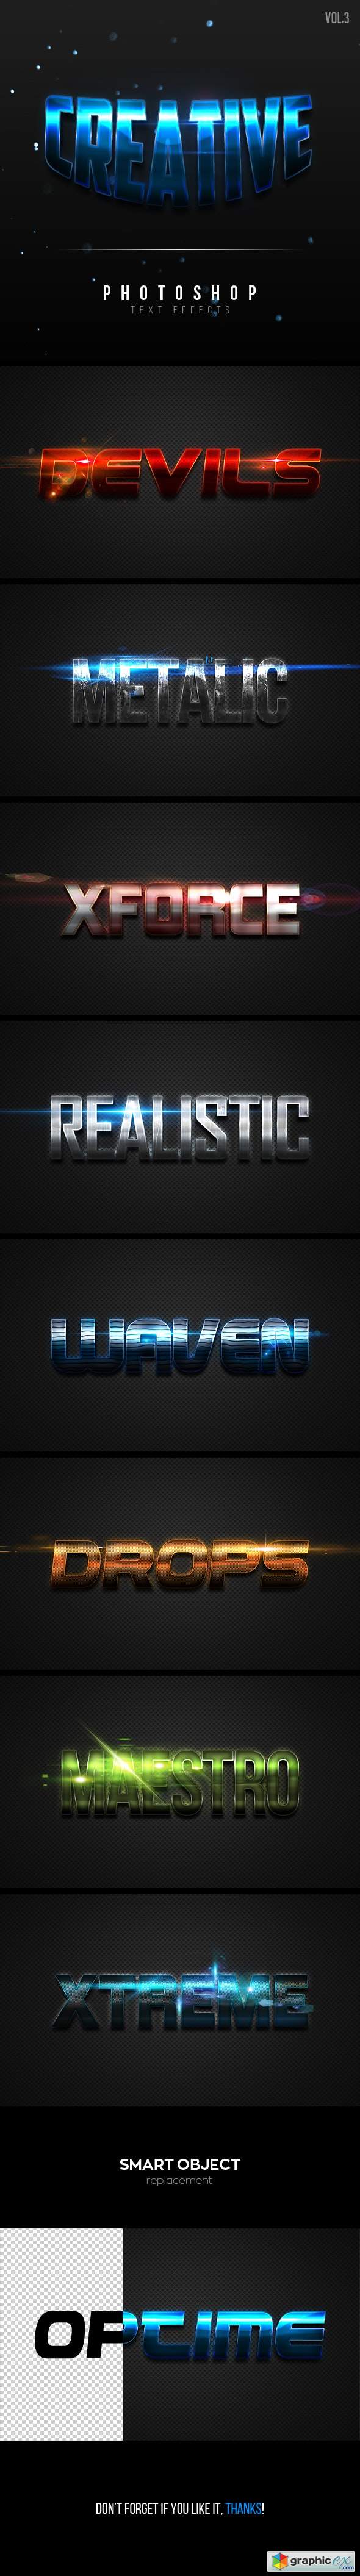 Creative Text Effects Vol.3